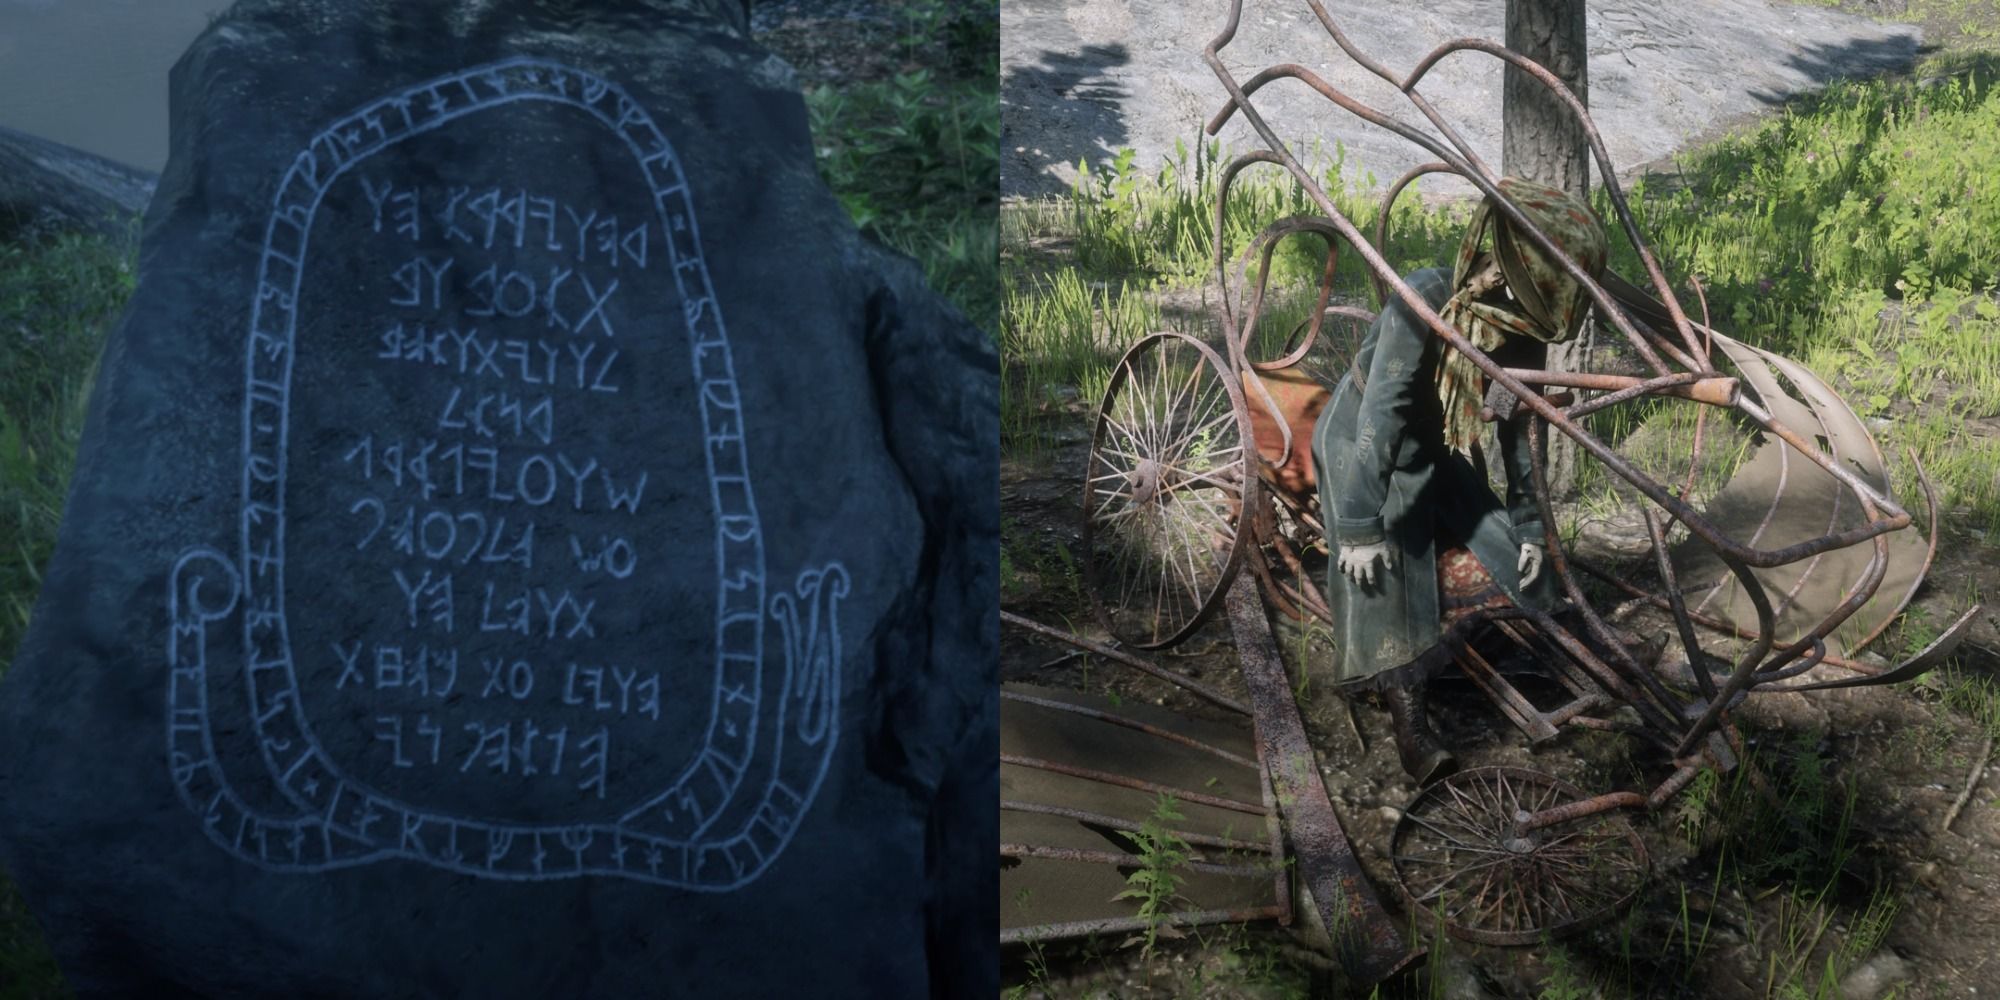 Split image showing a stone with runes and a wrecked machine in Red Dead Redemption.